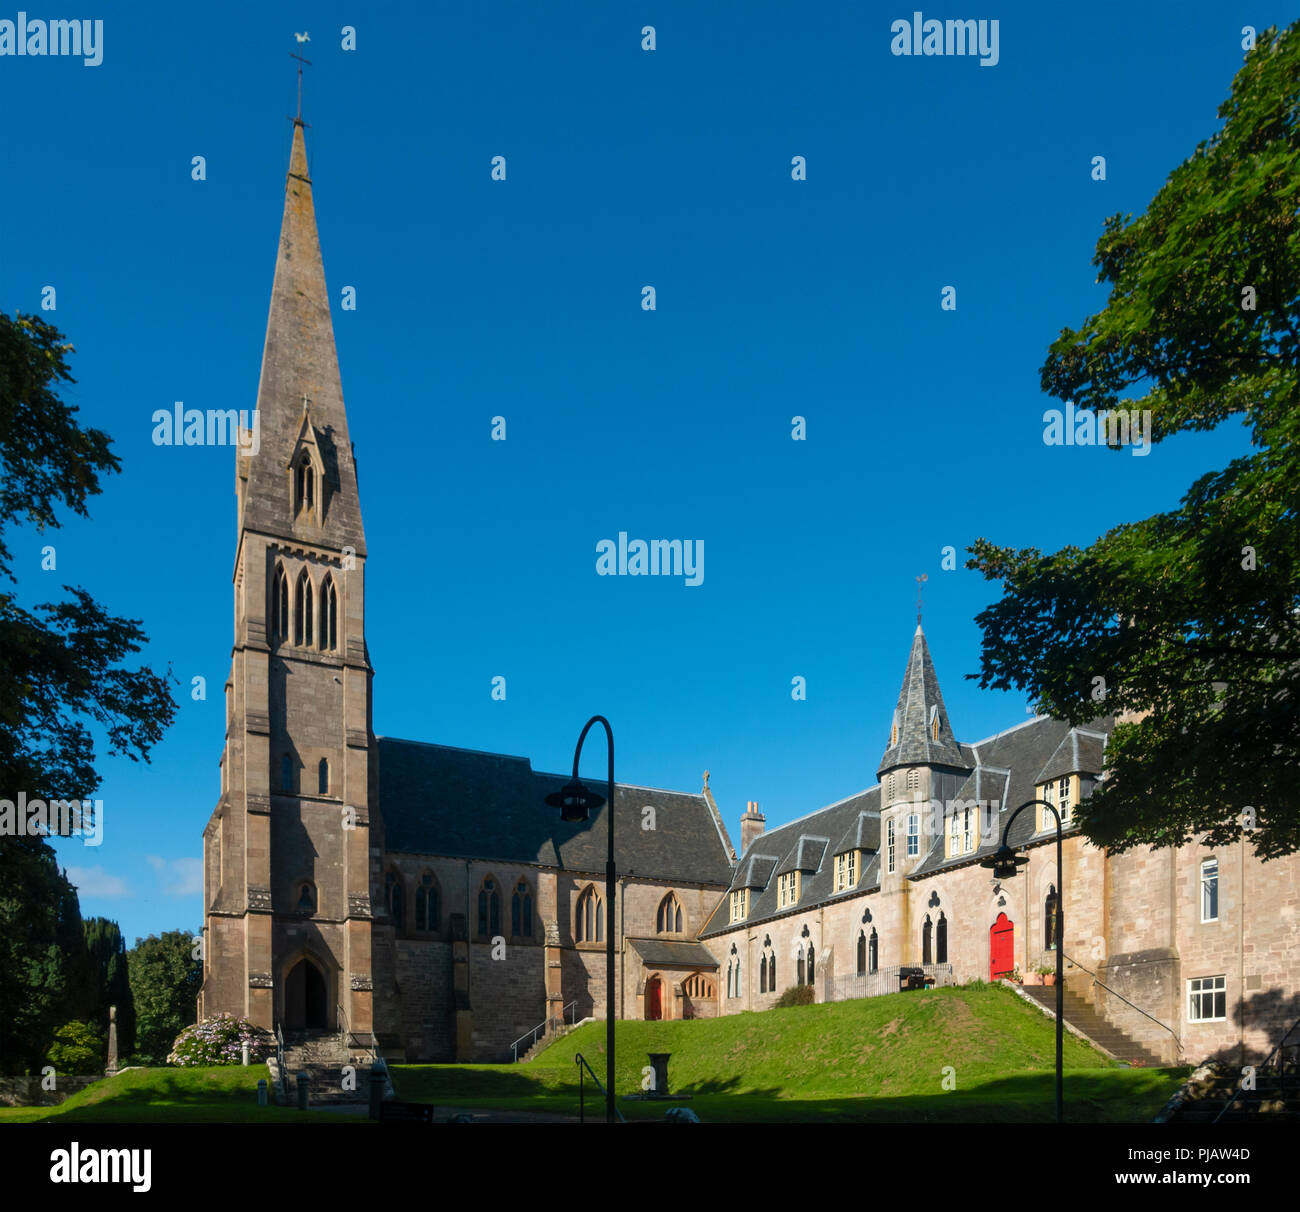 The Cathedral of the Isles (Scottish Episcopalian Church, William Butterfield, 1851), the smallest British Cathedral, & College of the Holy Spirt on t Stock Photo